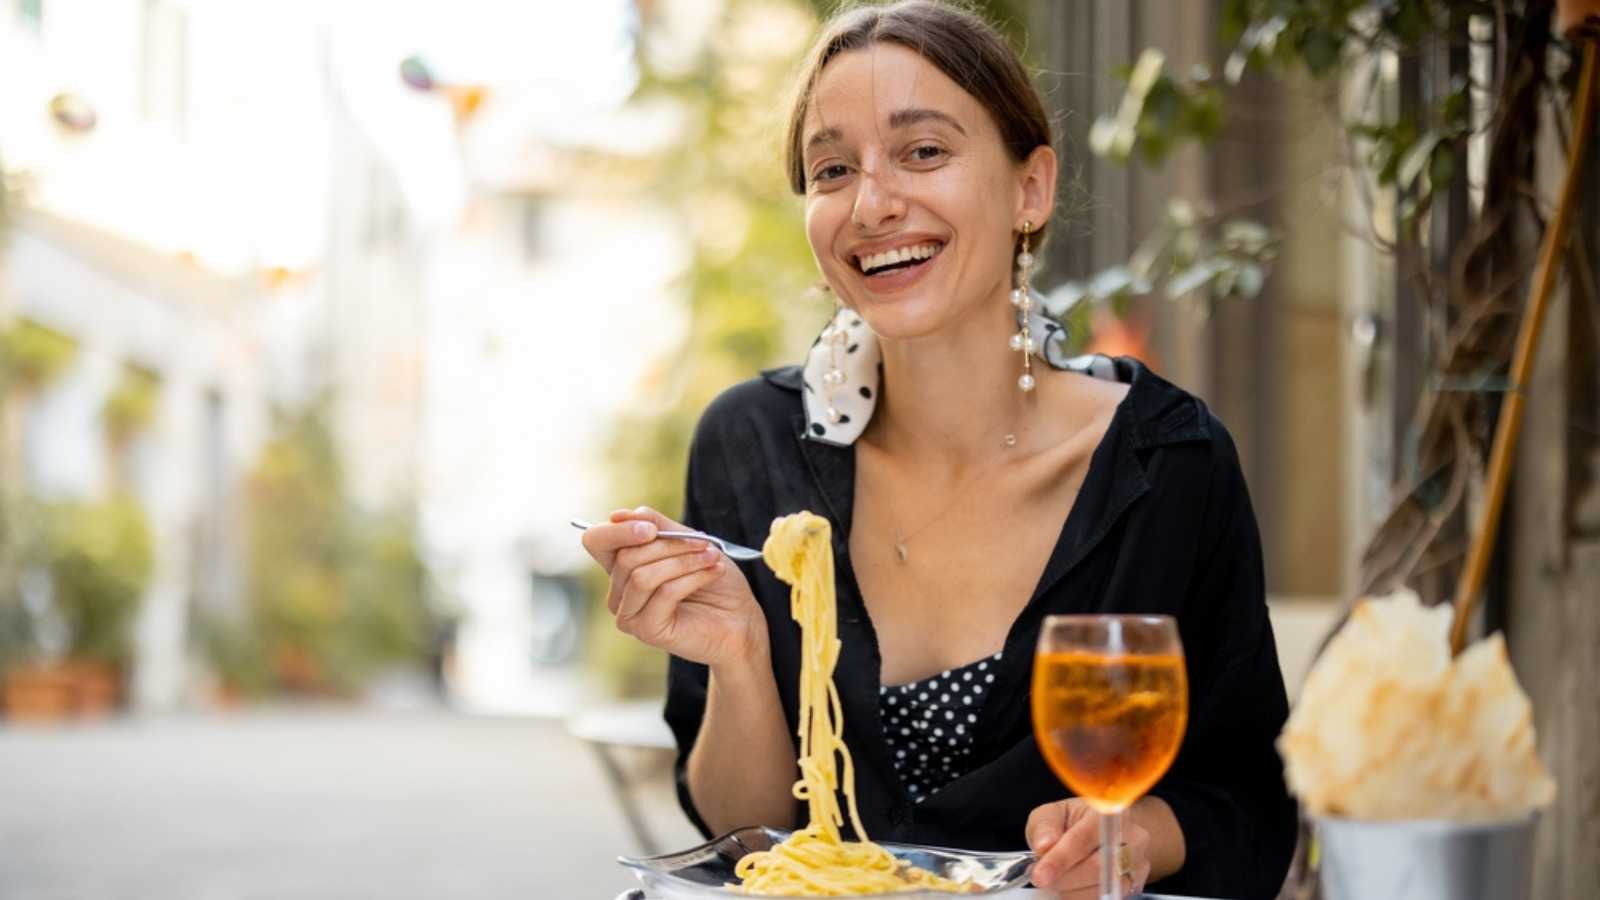 Portrait of a smiling woman eating pasta and wine at cozy italian restaurant outdoors. Concept of italian cuisine and lifestyle. Italian pasta carbonara and Spritz Aperol